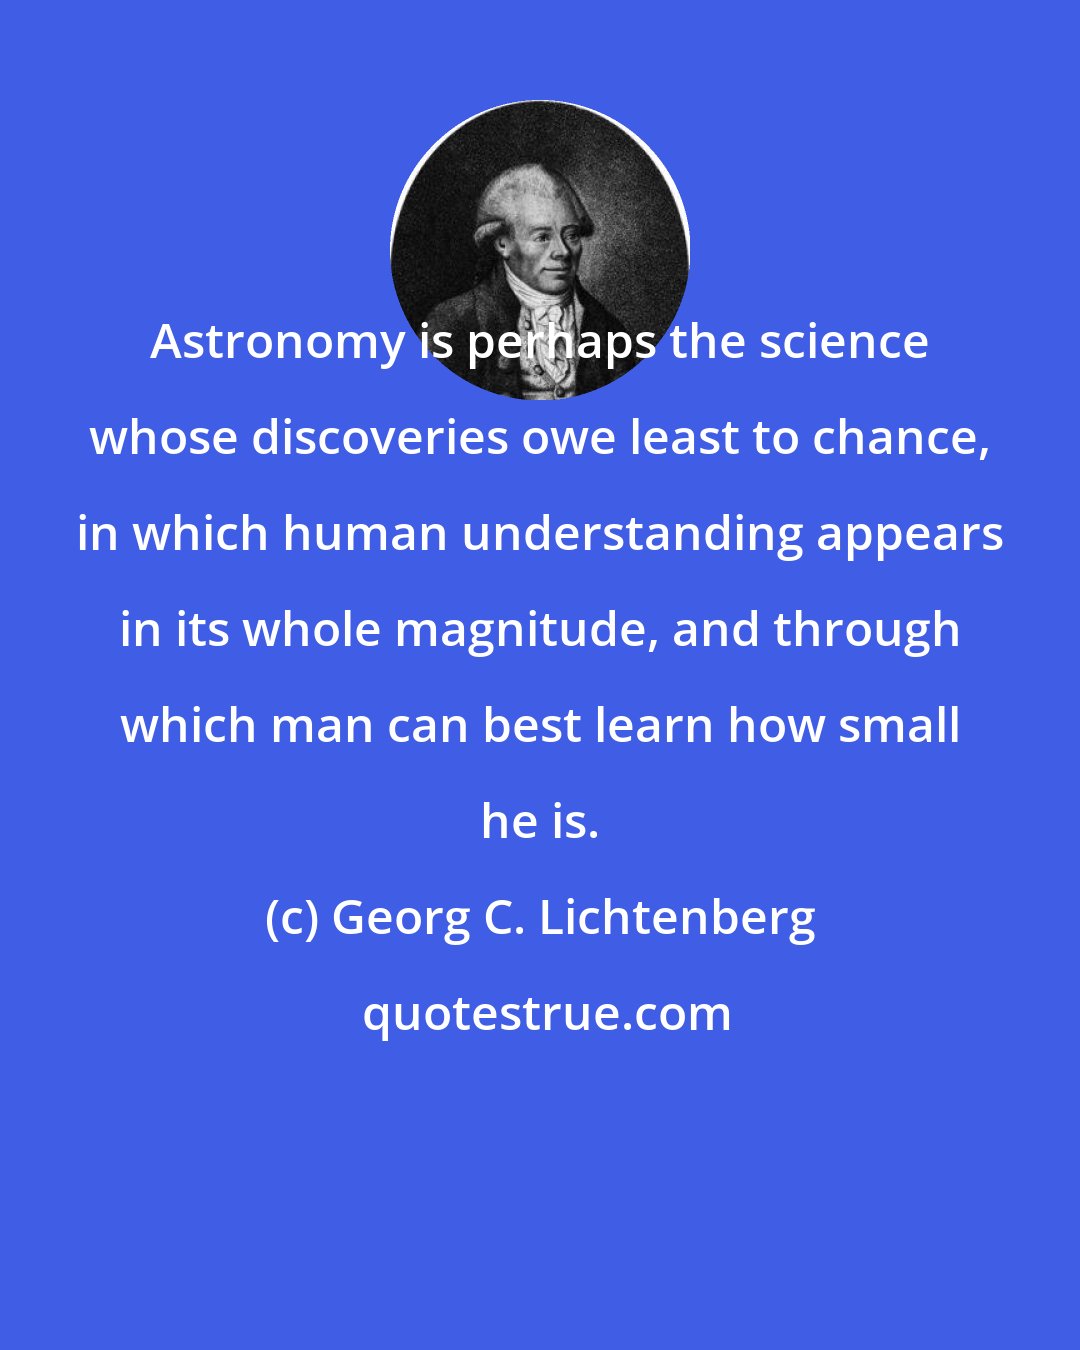 Georg C. Lichtenberg: Astronomy is perhaps the science whose discoveries owe least to chance, in which human understanding appears in its whole magnitude, and through which man can best learn how small he is.